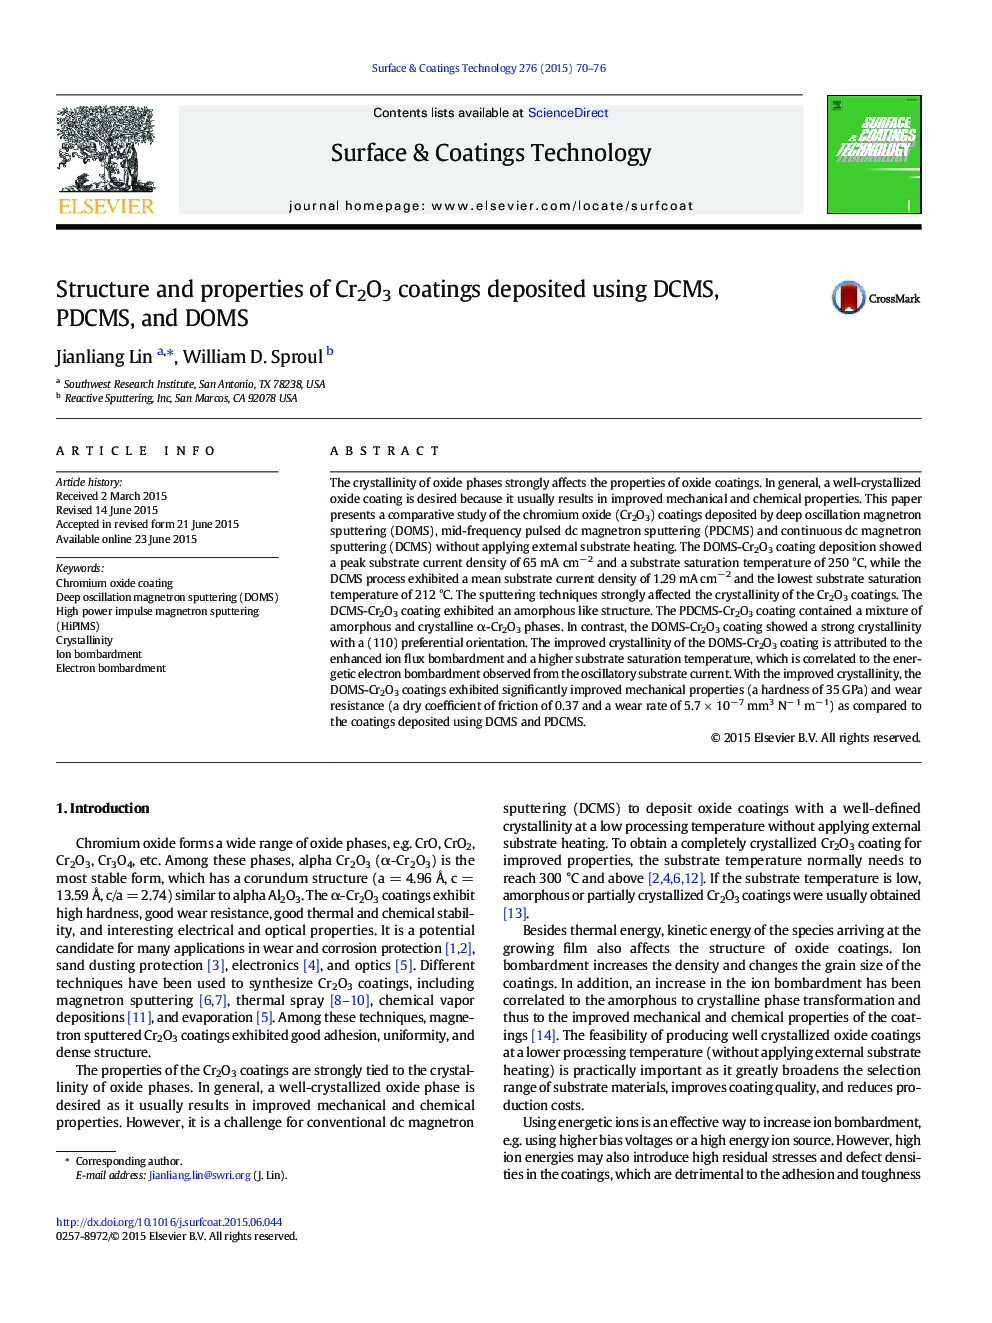 Structure and properties of Cr2O3 coatings deposited using DCMS, PDCMS, and DOMS